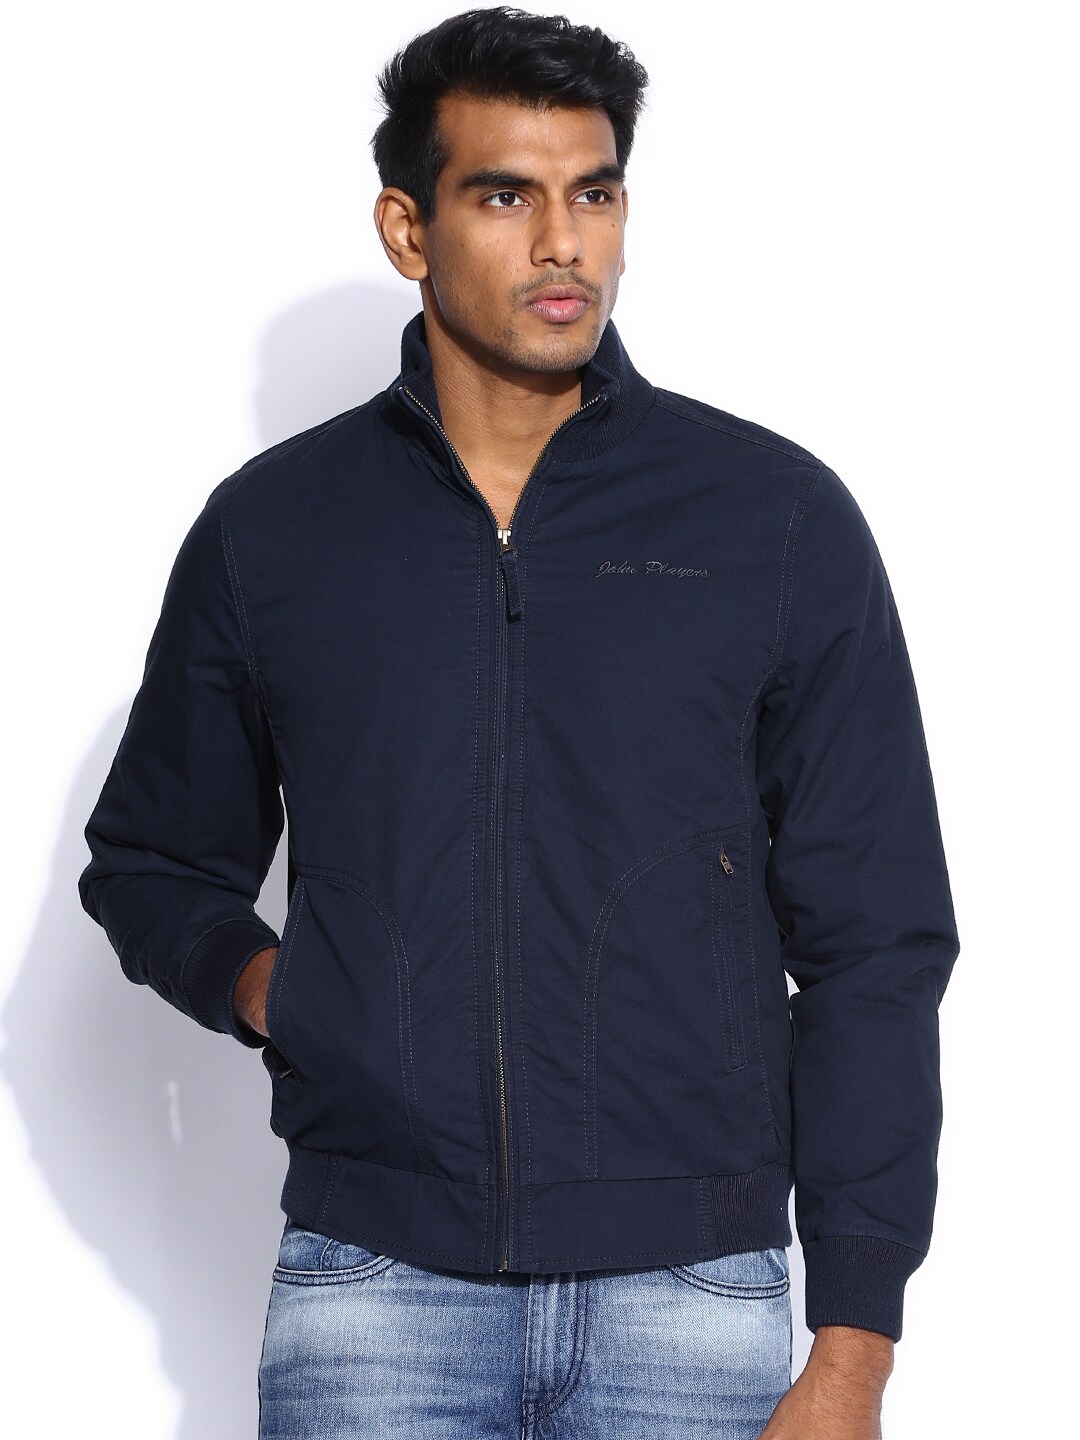 Men Casual Wear Manufacturers John Players in Chennai - Dealers,  Manufacturers & Suppliers -Justdial